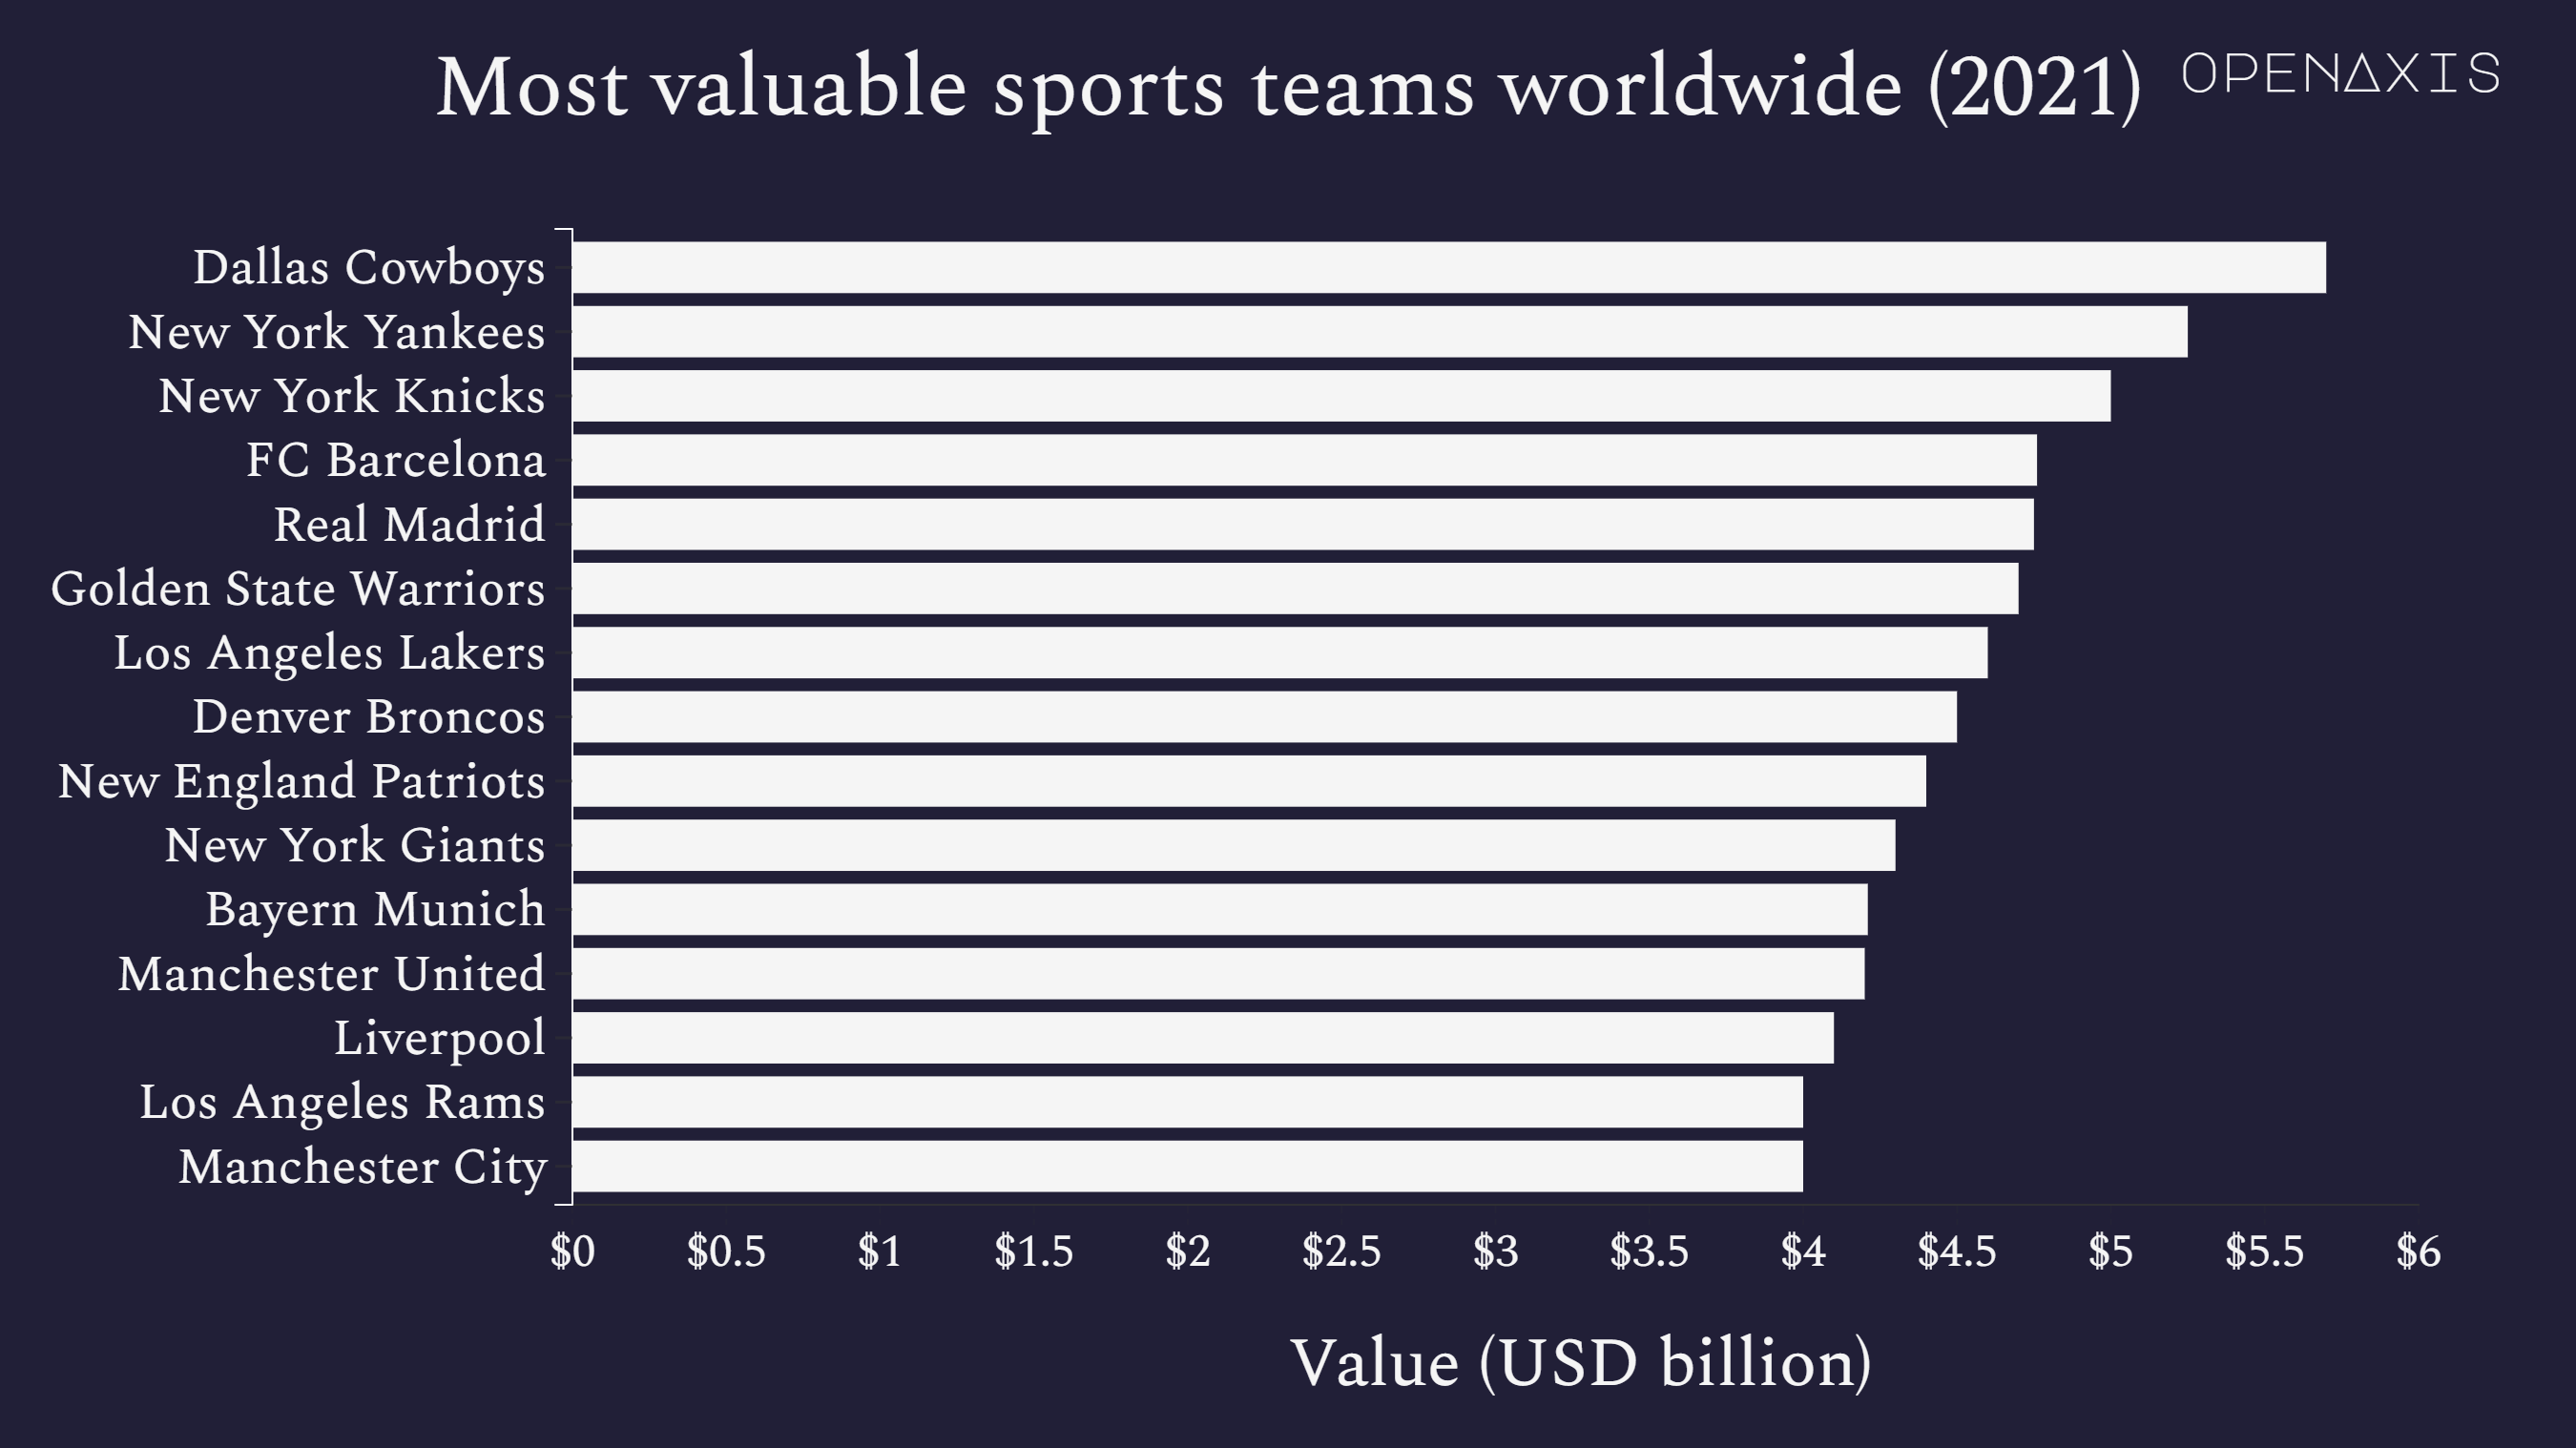 "Most valuable sports teams worldwide (2021)"